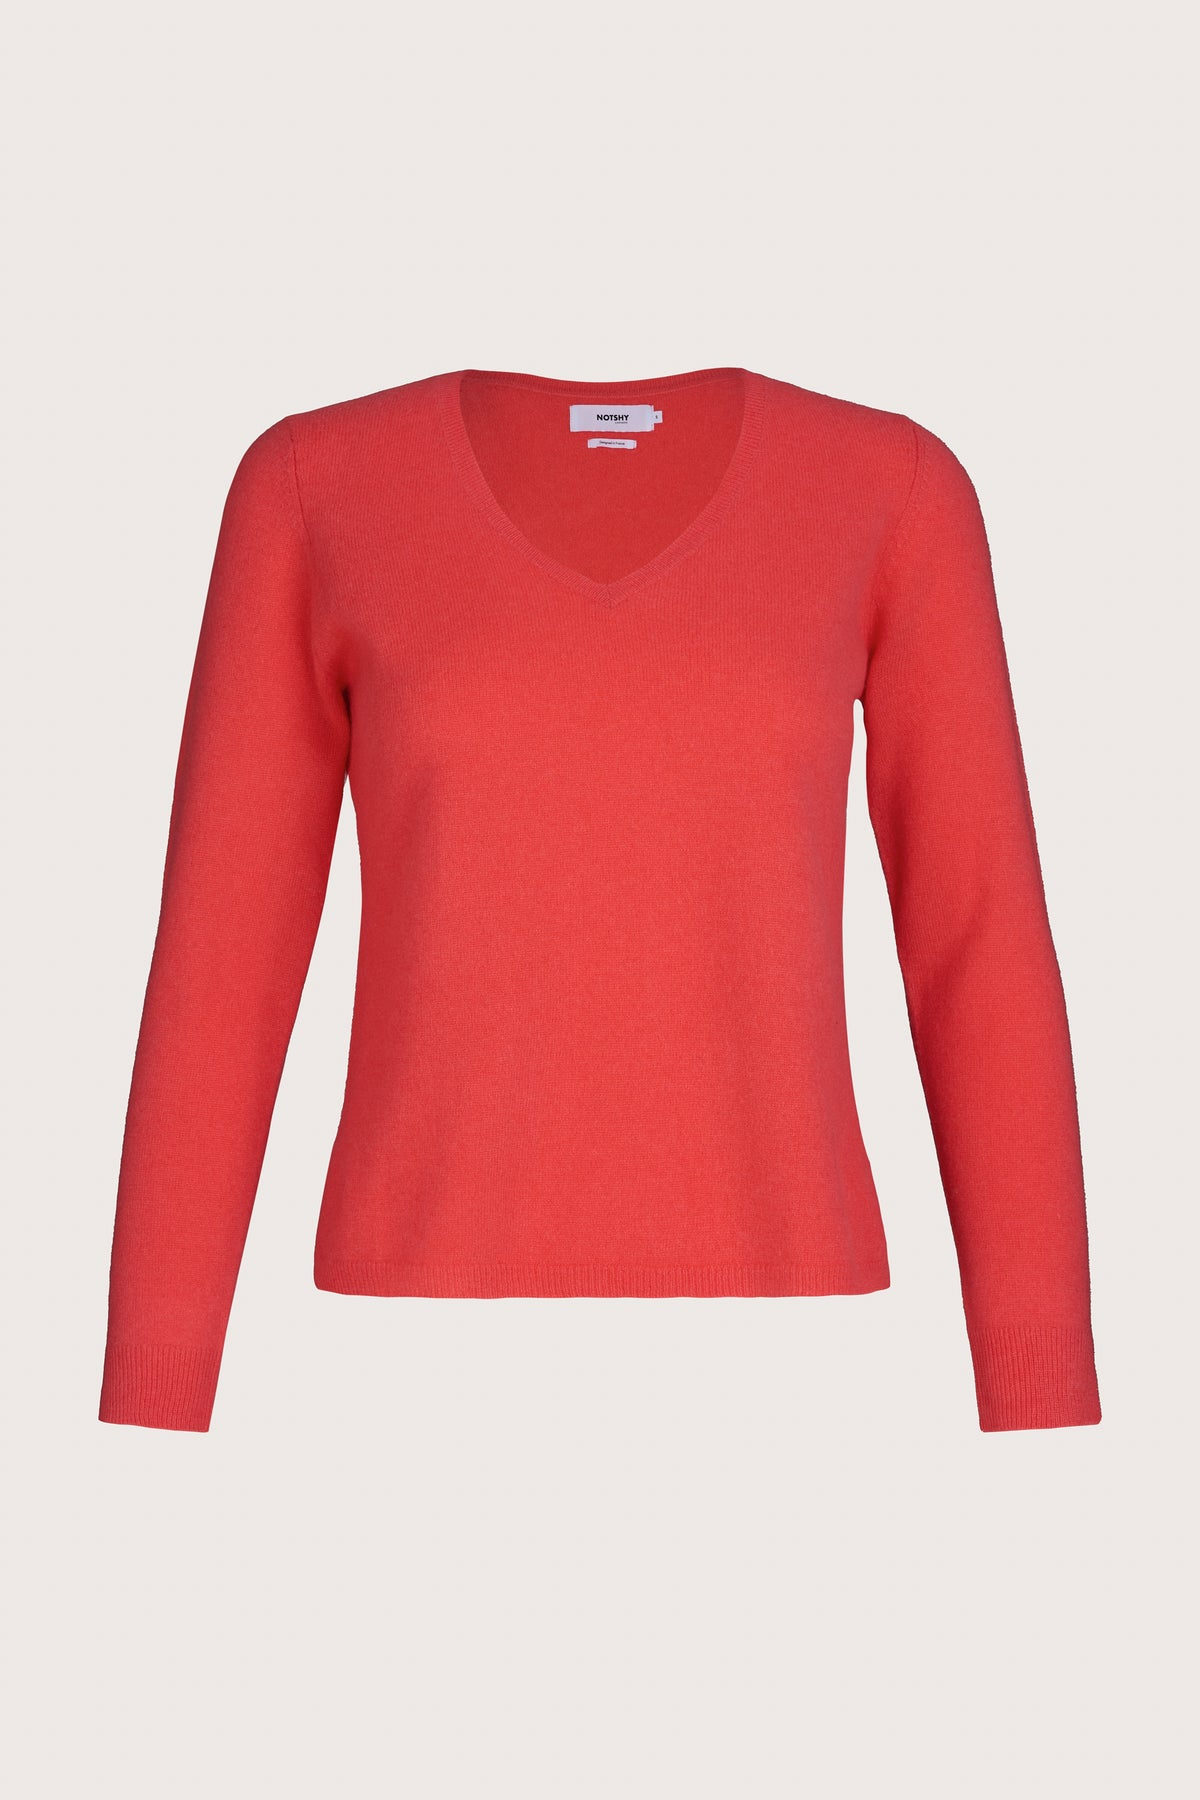 V neck coral cashmere jumper with long sleeves